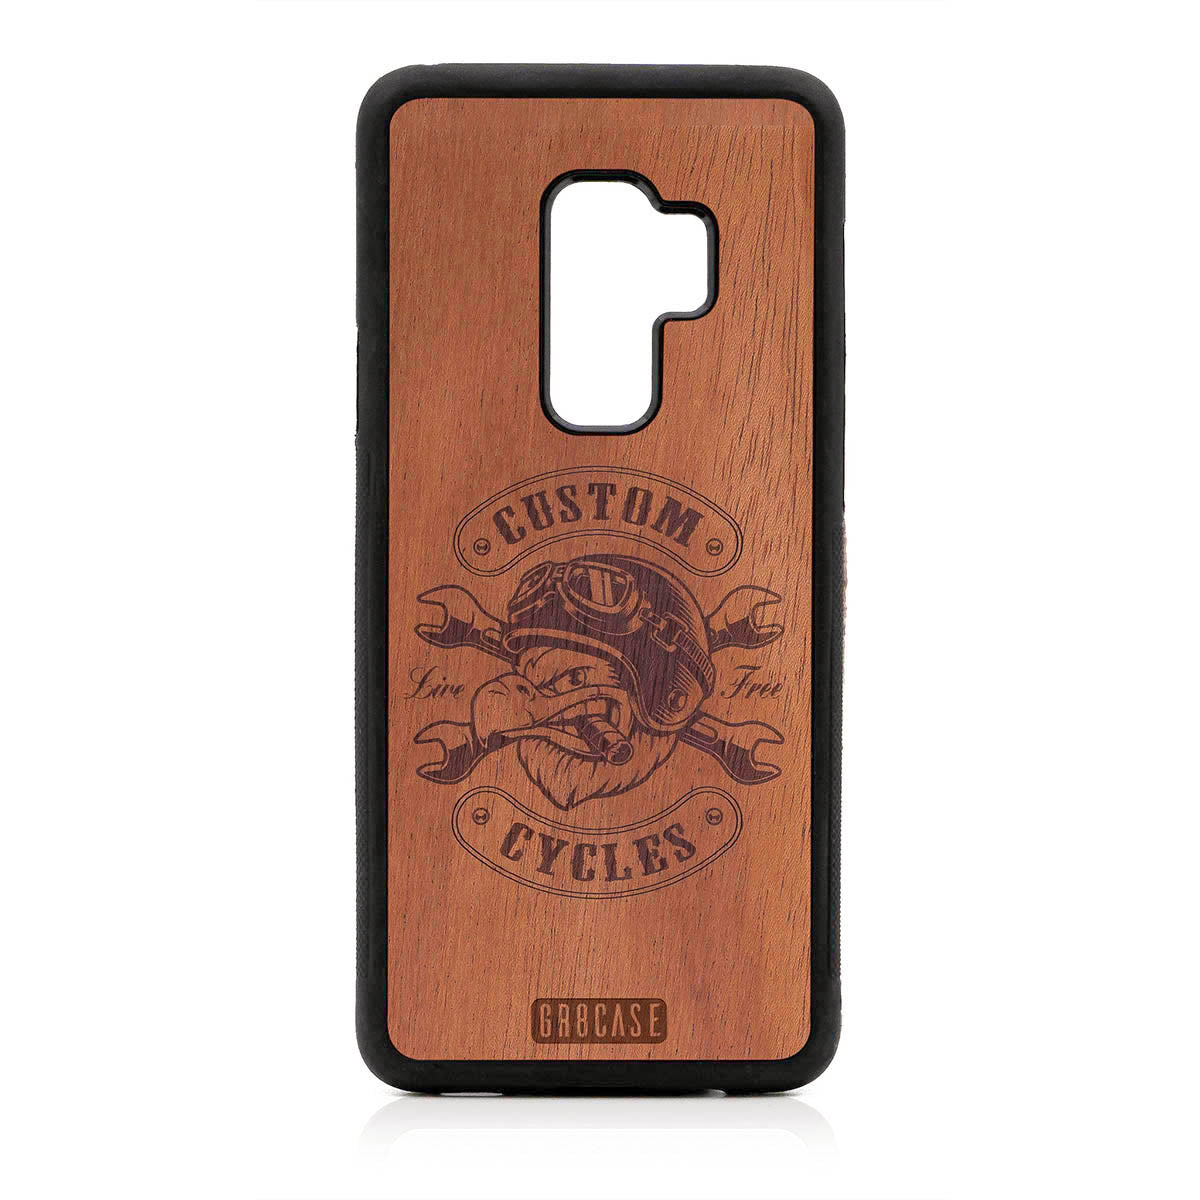 Custom Cycles Live Free (Biker Eagle) Design Wood Case For Samsung Galaxy S9 Plus by GR8CASE